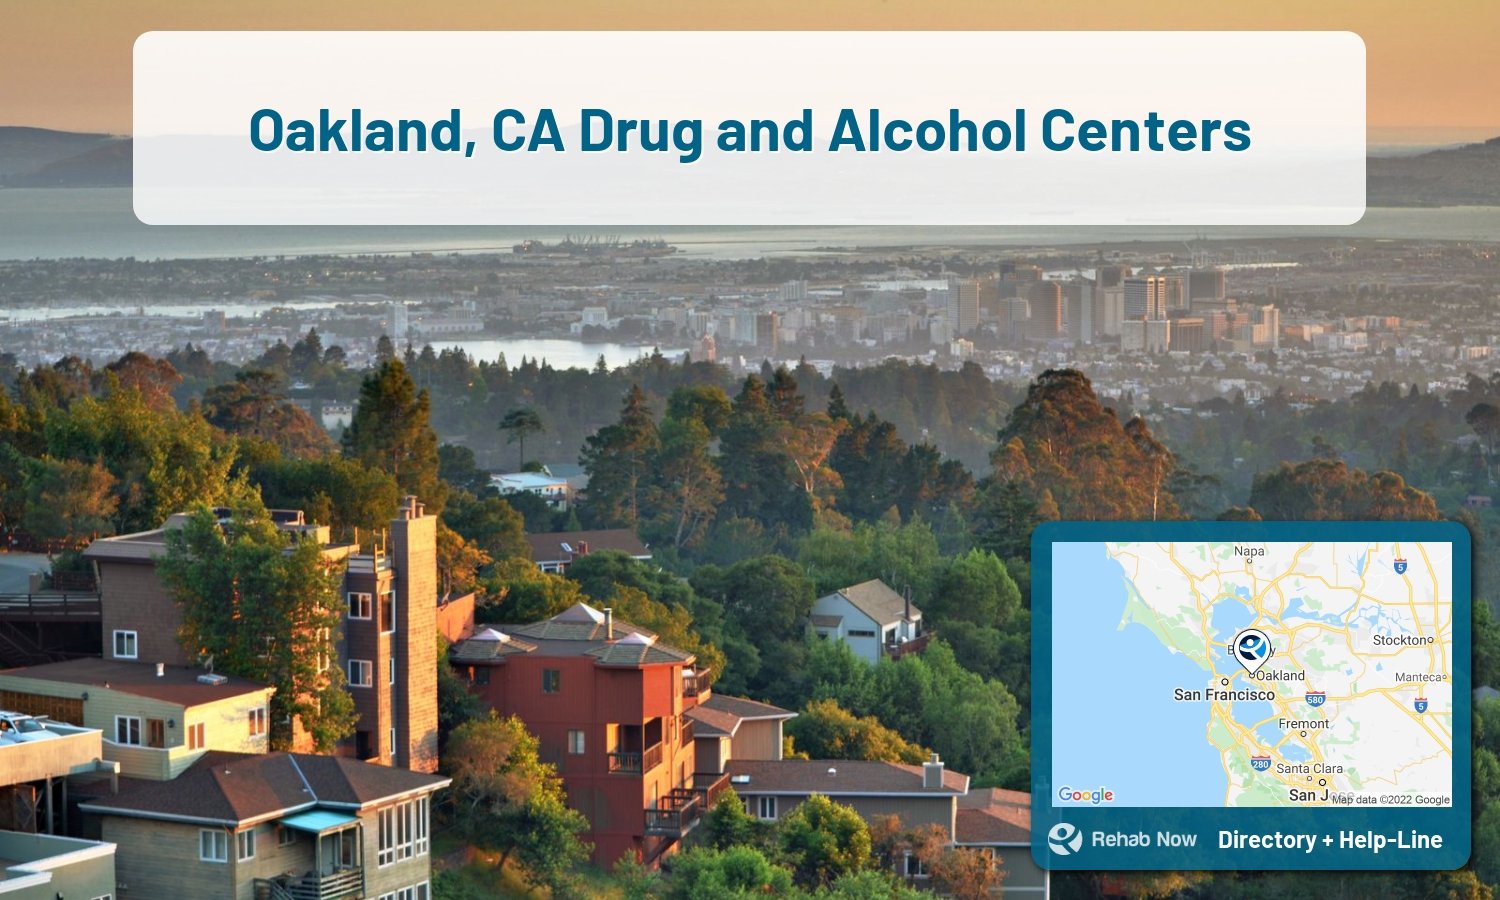 Oakland, CA Treatment Centers. Find drug rehab in Oakland, California, or detox and treatment programs. Get the right help now!